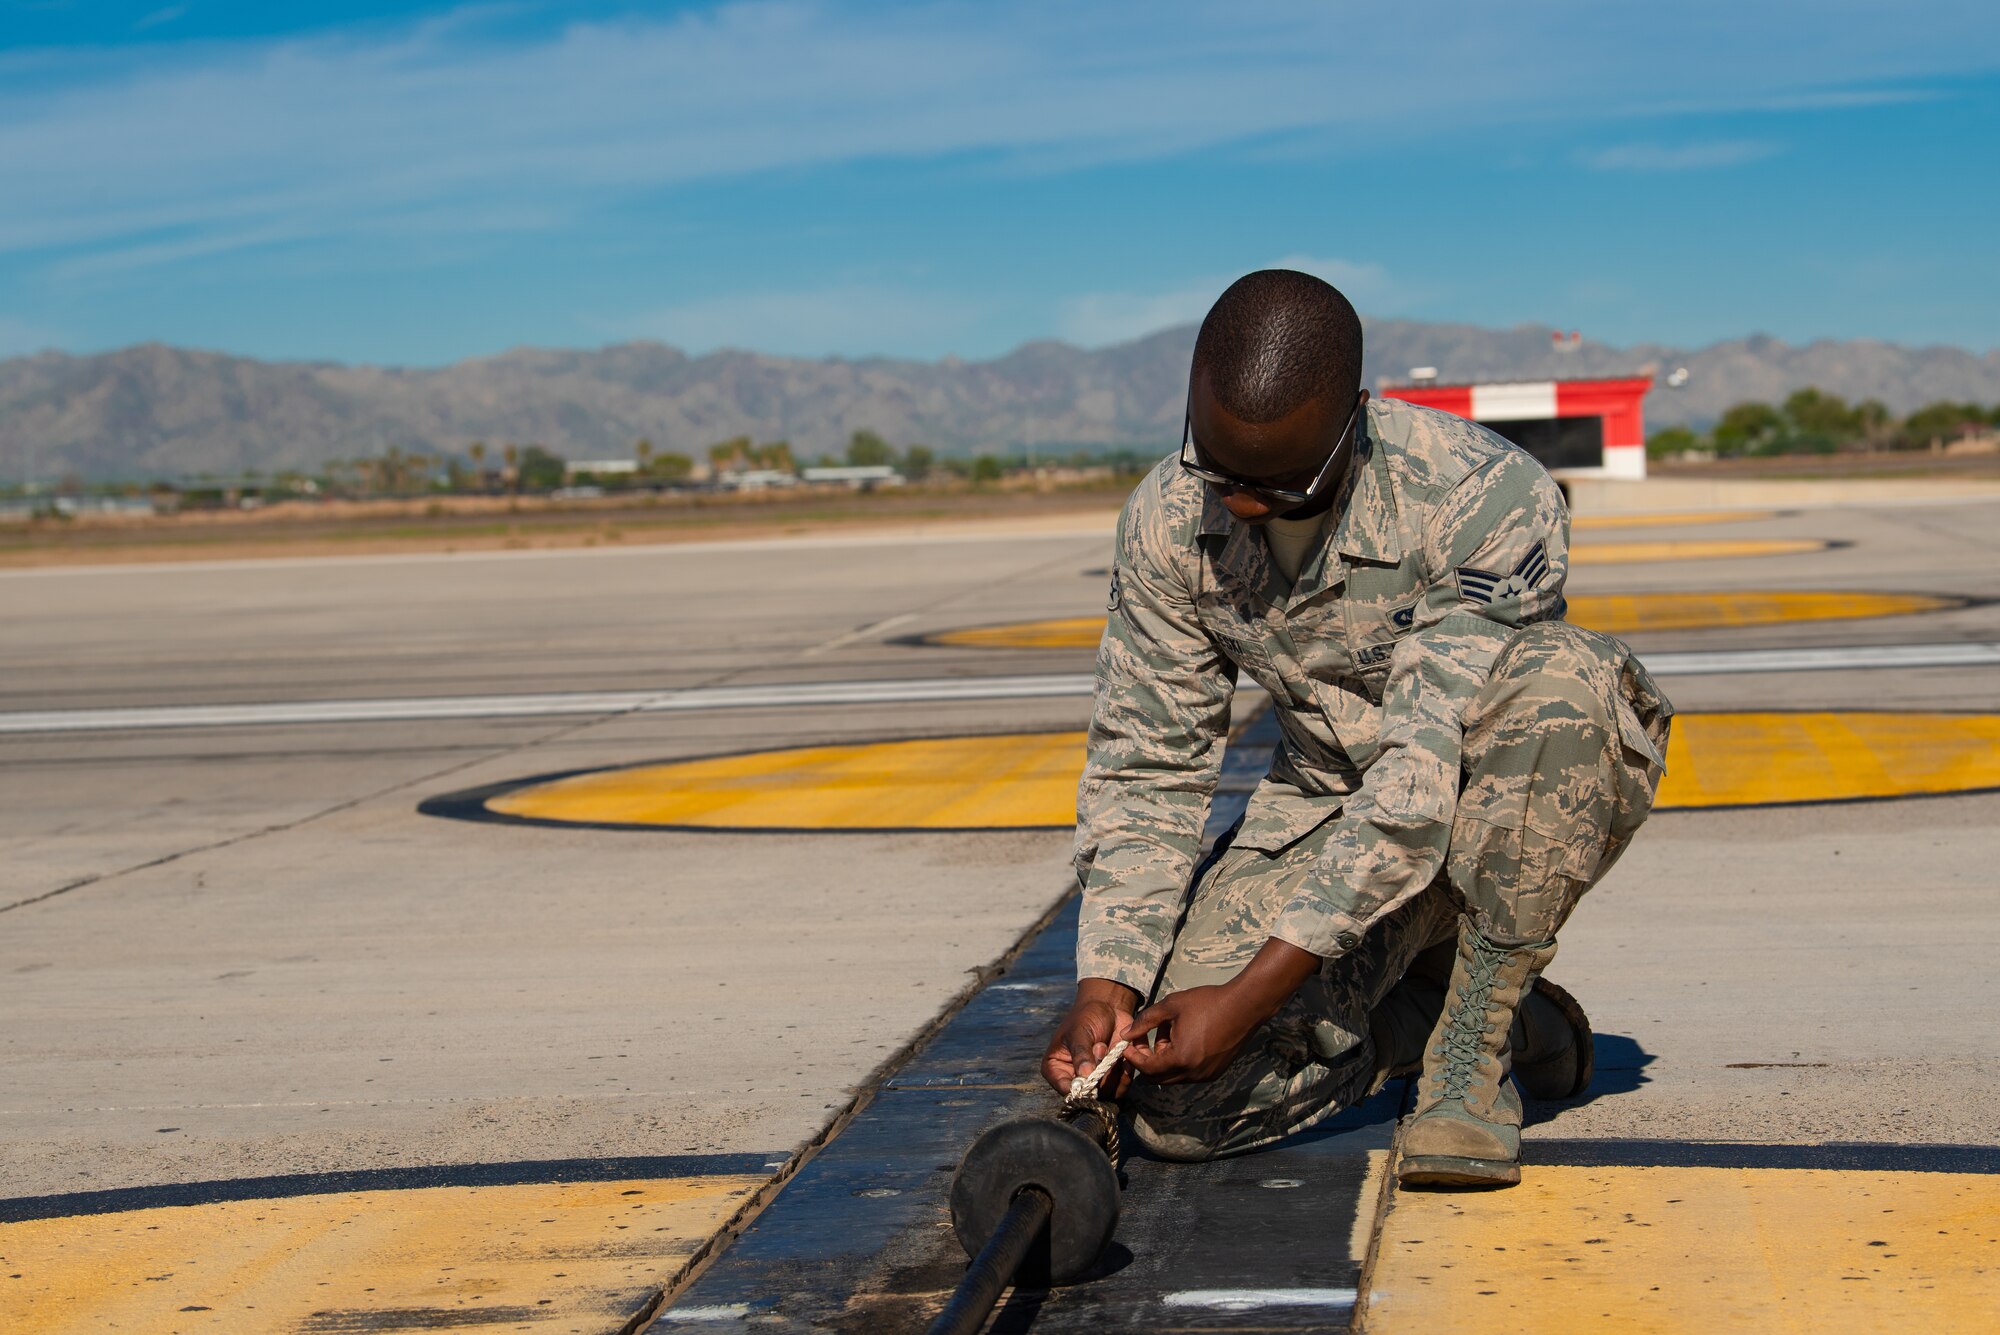 Senior Airman Derrick Beleski, 56th Operation Support Squadron airfield management operations supervisor, looks over a safety cable system, Oct. 24, 2018, at Luke Air Force Base, Ariz.